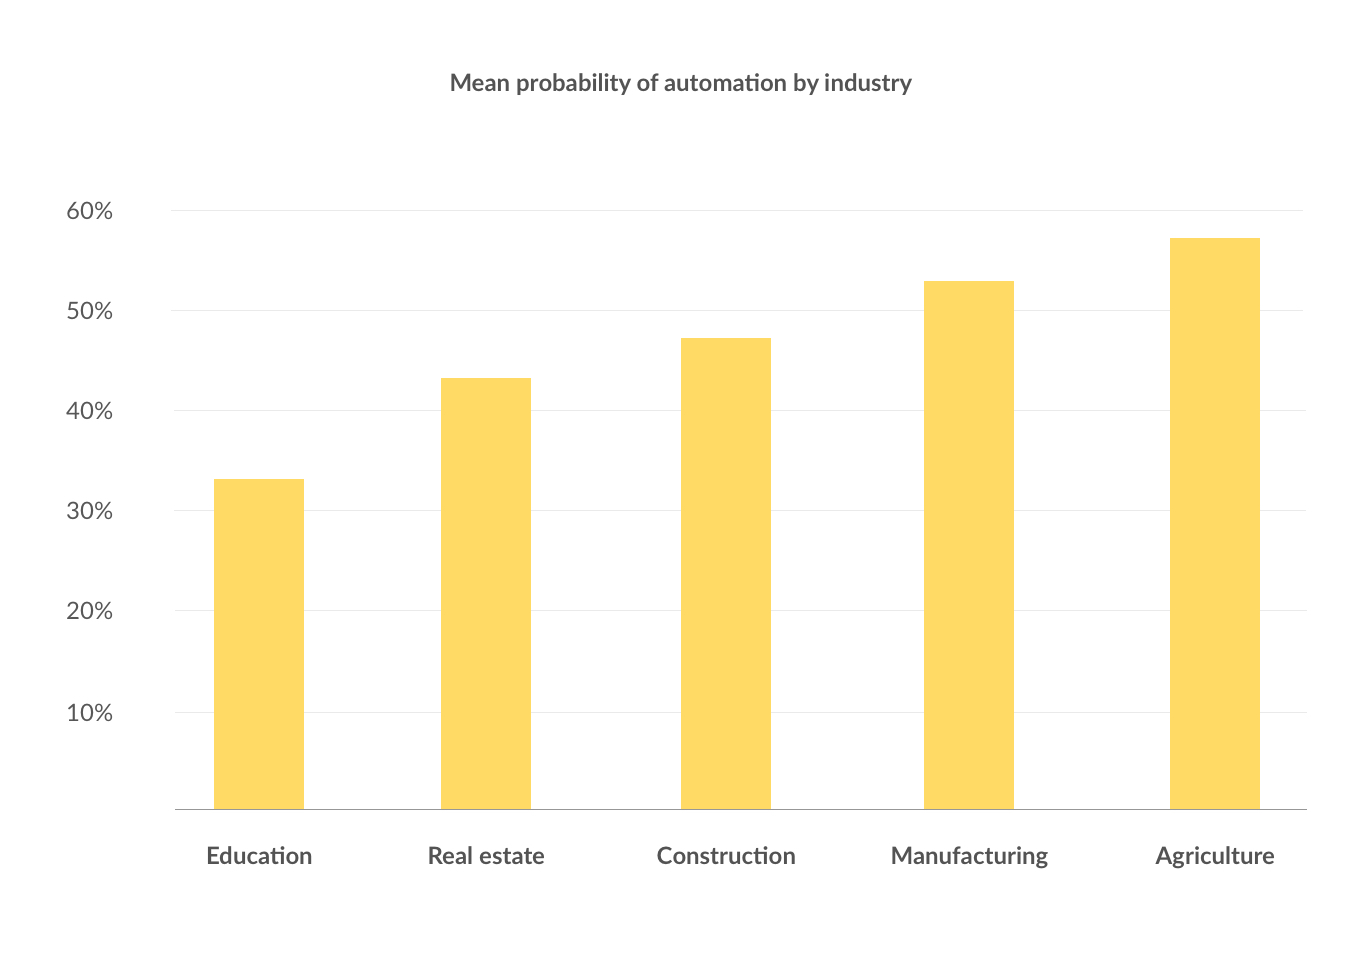 Bar chart showing mean probability of automation by industry. From lowest probability to highest it goes: Education, Real Estate, Construction, Manufacturing, Agriculture